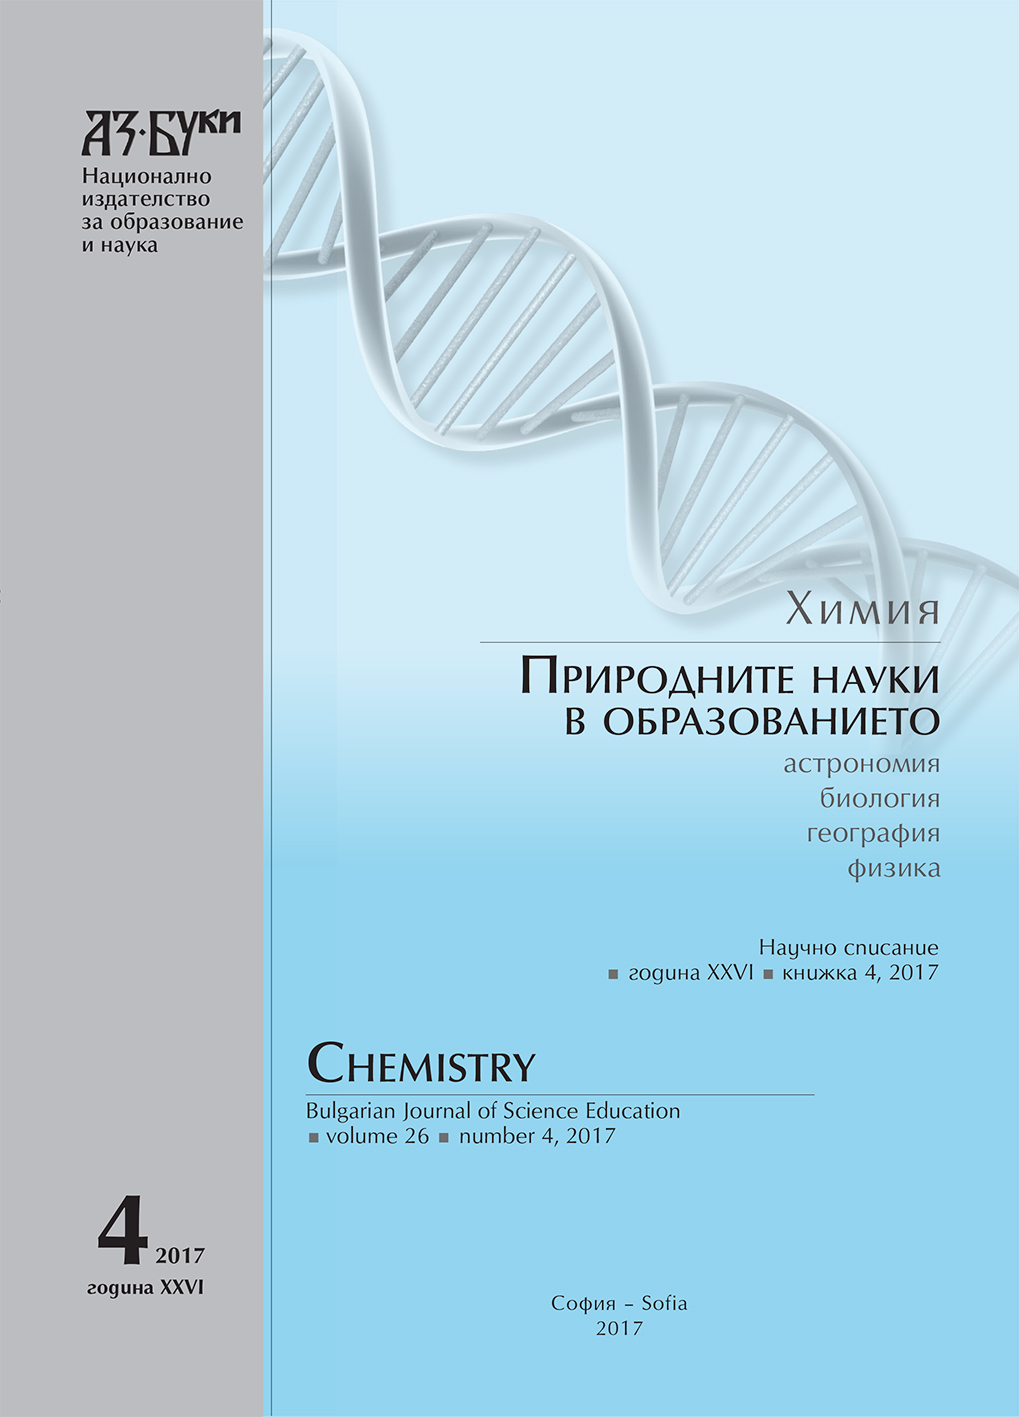 IUPAC Approved Permanent Names of the Chemical Elements 113, 115, 117 and 118: The Seventh Period of the Periodic Table of the Chemical Elements Is Completed Cover Image